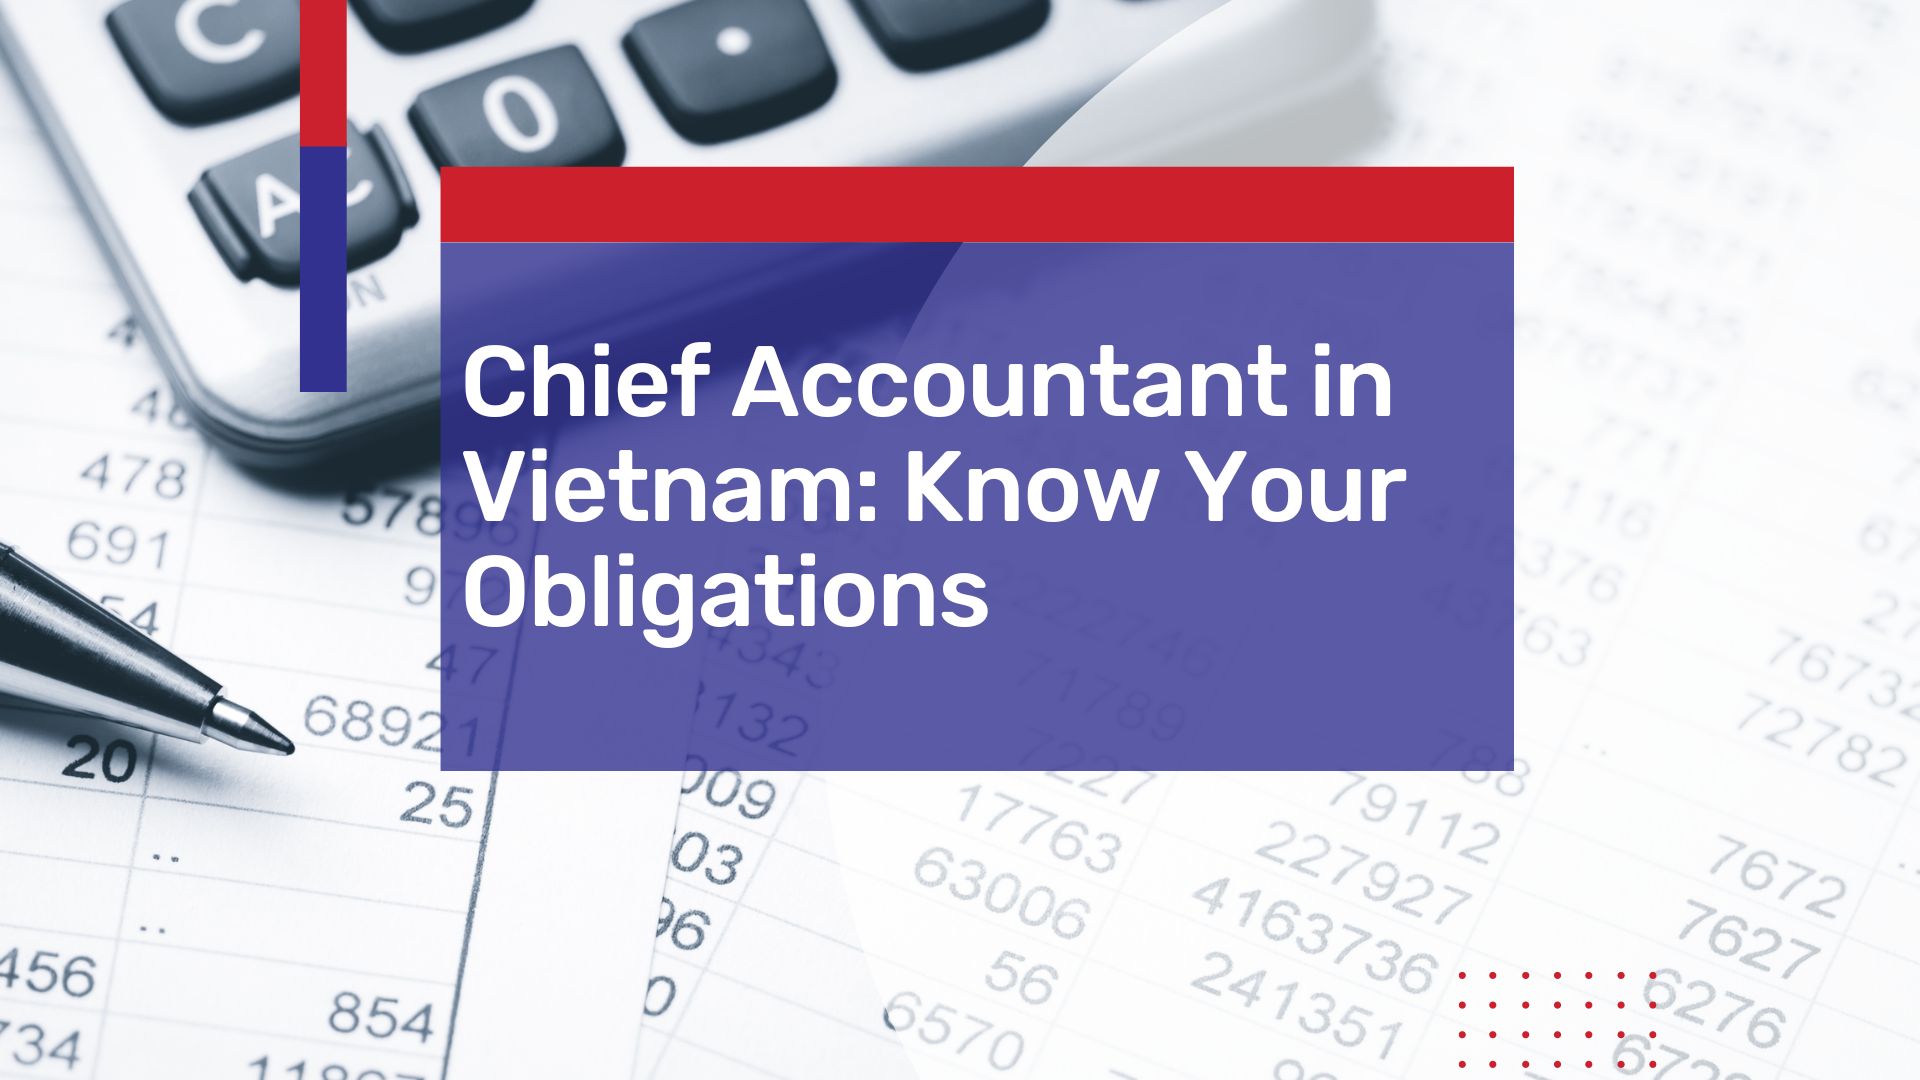 Chief Accountant for Companies in Vietnam: Know Your Obligations